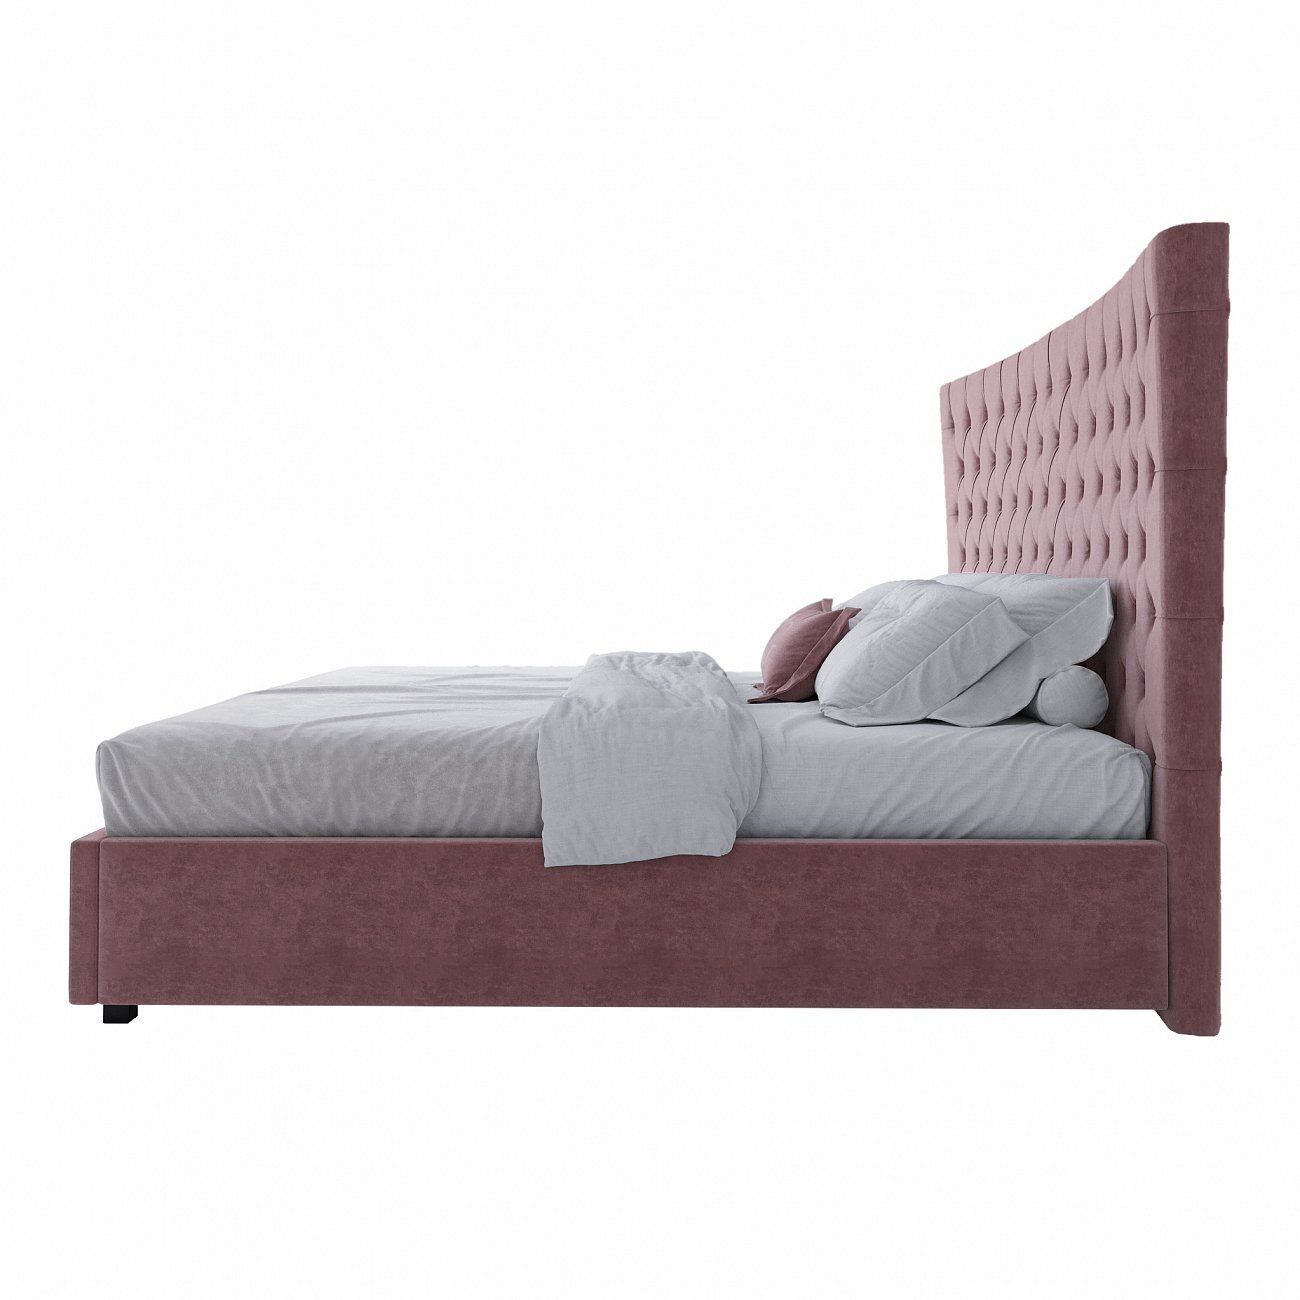 Euro bed with upholstered headboard 200x200 cm dusty rose QuickSand